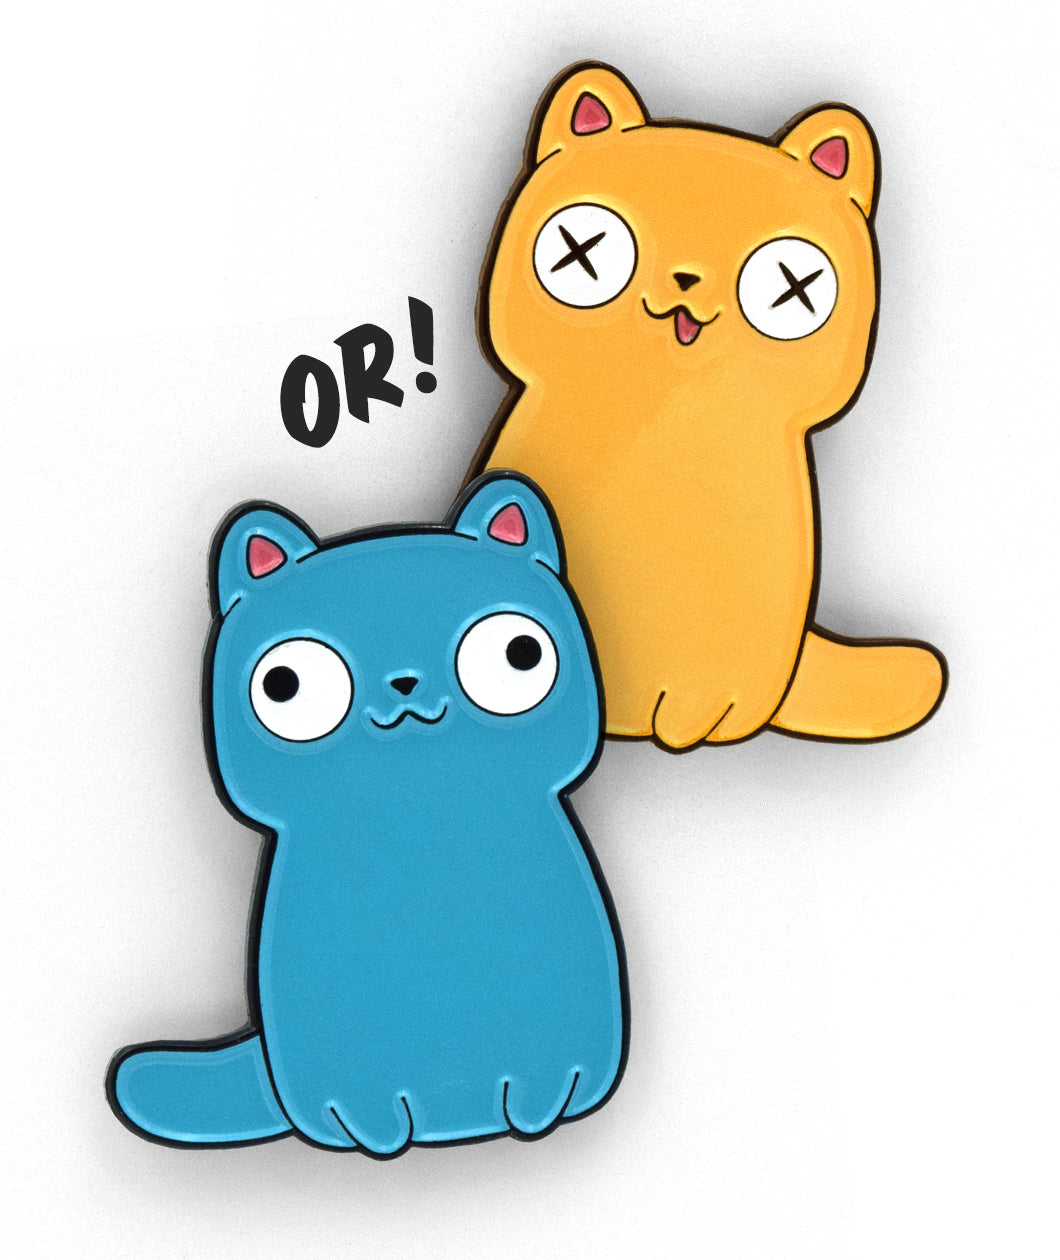 Yellow cartoon cat pin with a thin black outline. Two small paws at the bottom with a tail coming out at the bottom right. Tongue is hanging out and eyes are white with two black X’s in its eyes. Blue cartoon cat pin with black outline. Two small paws are at the bottom with a tail coming out of the bottom left. Two white eyes with black pupils looking off in opposite direction - from Physics Girl